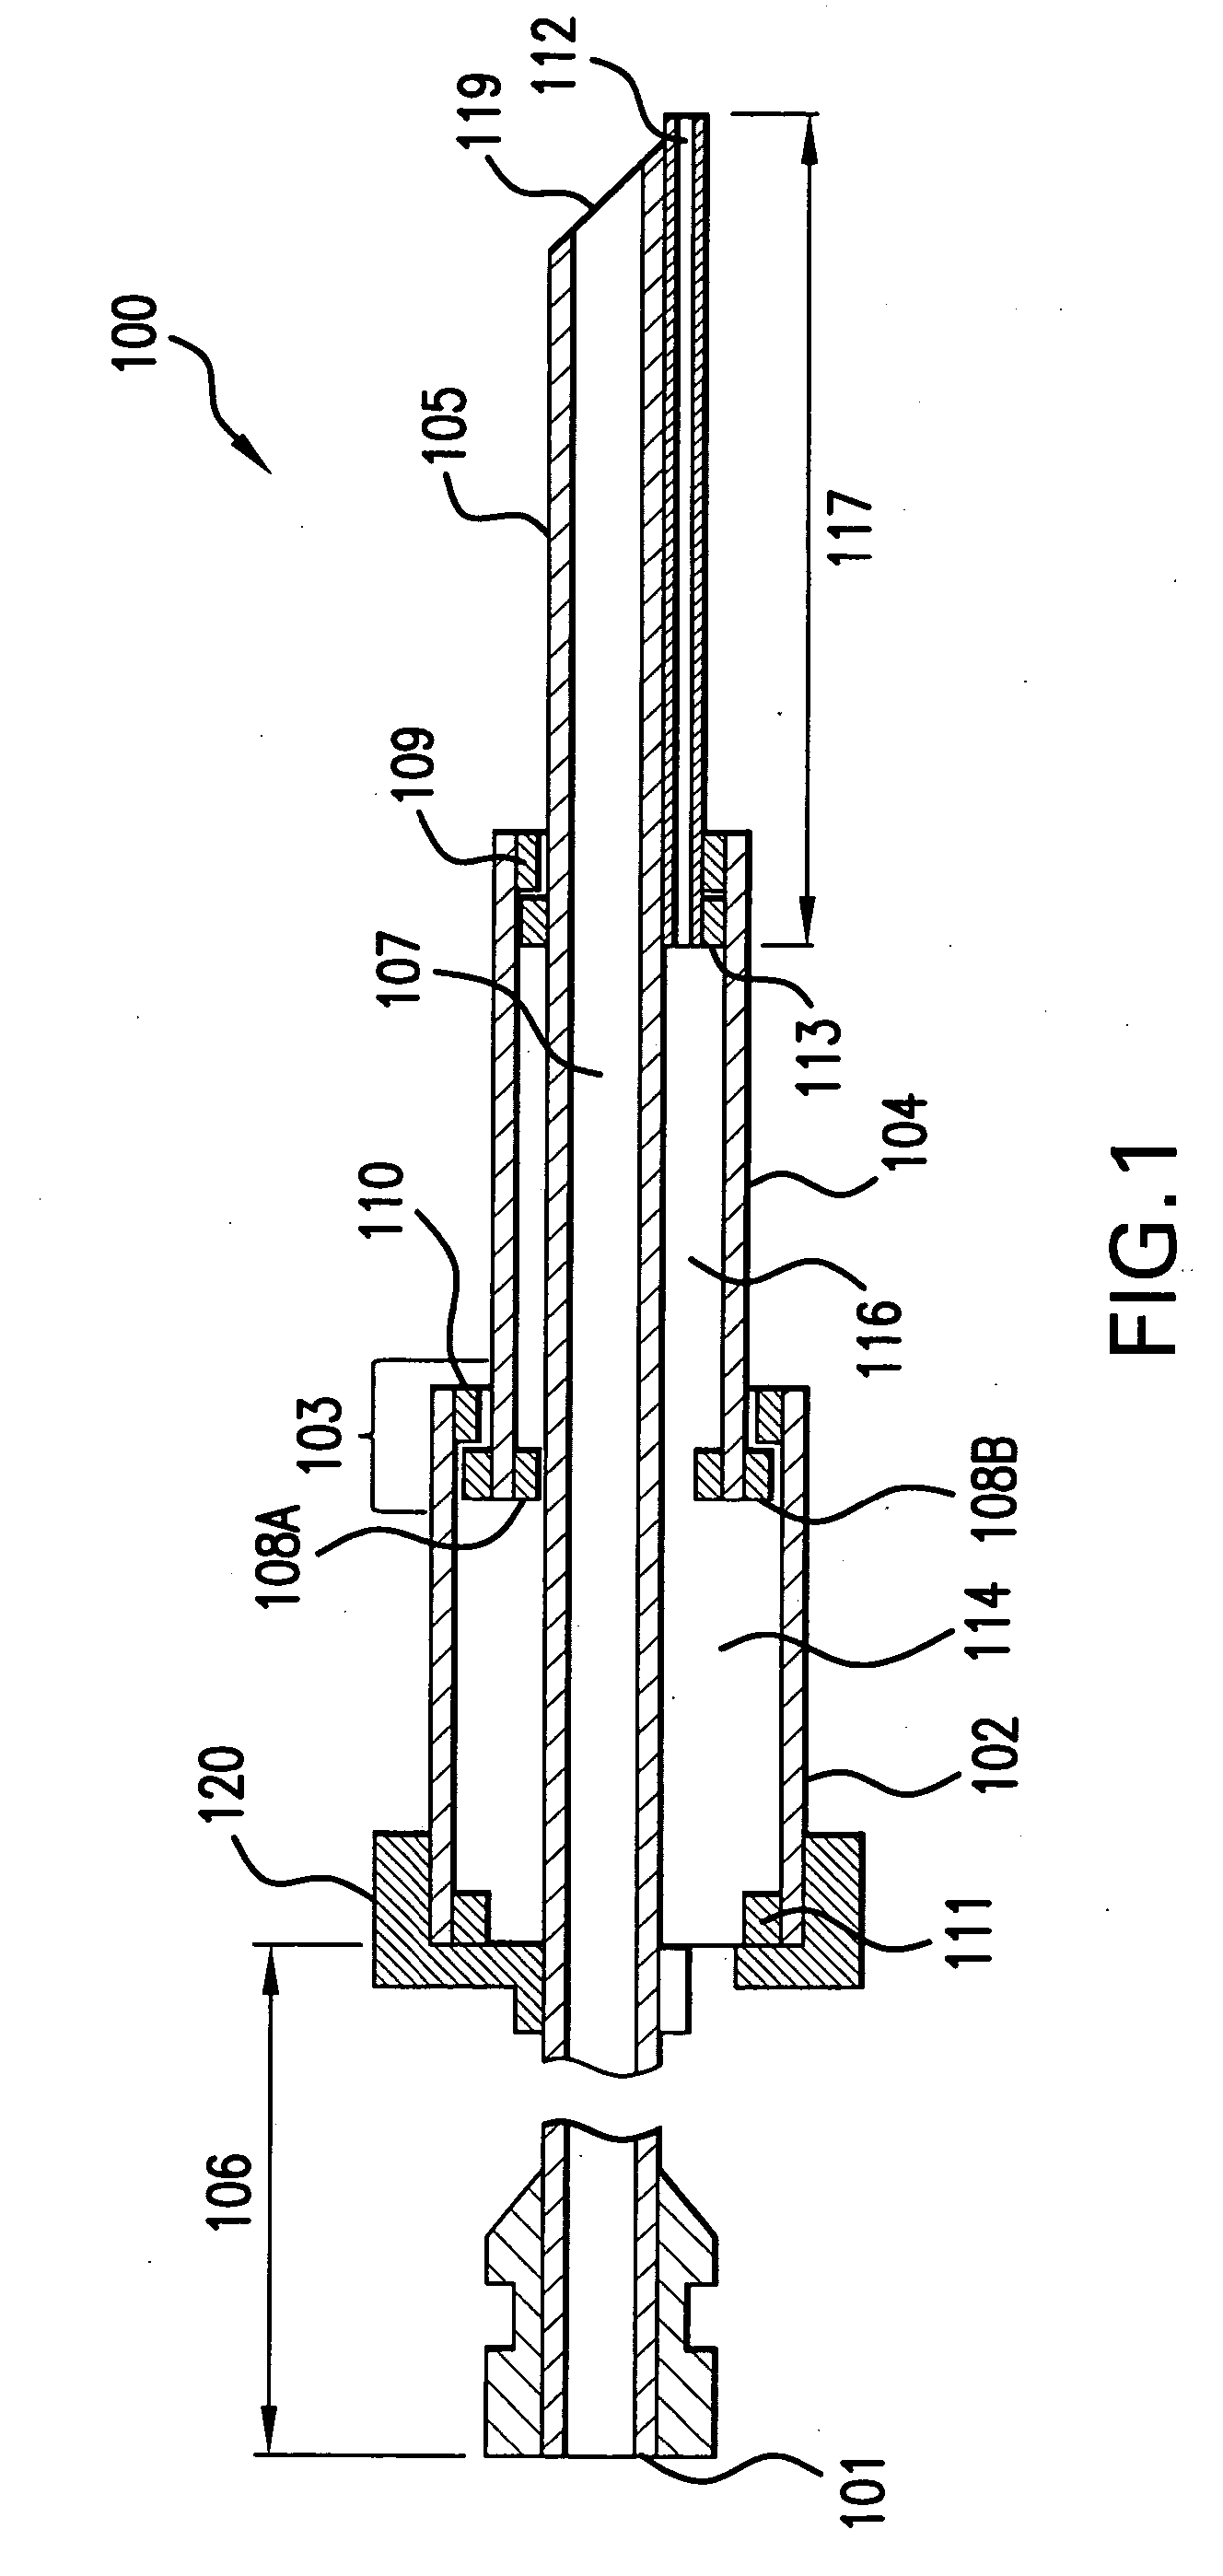 Aspiration catheter having a variable over-the-wire length and methods of use